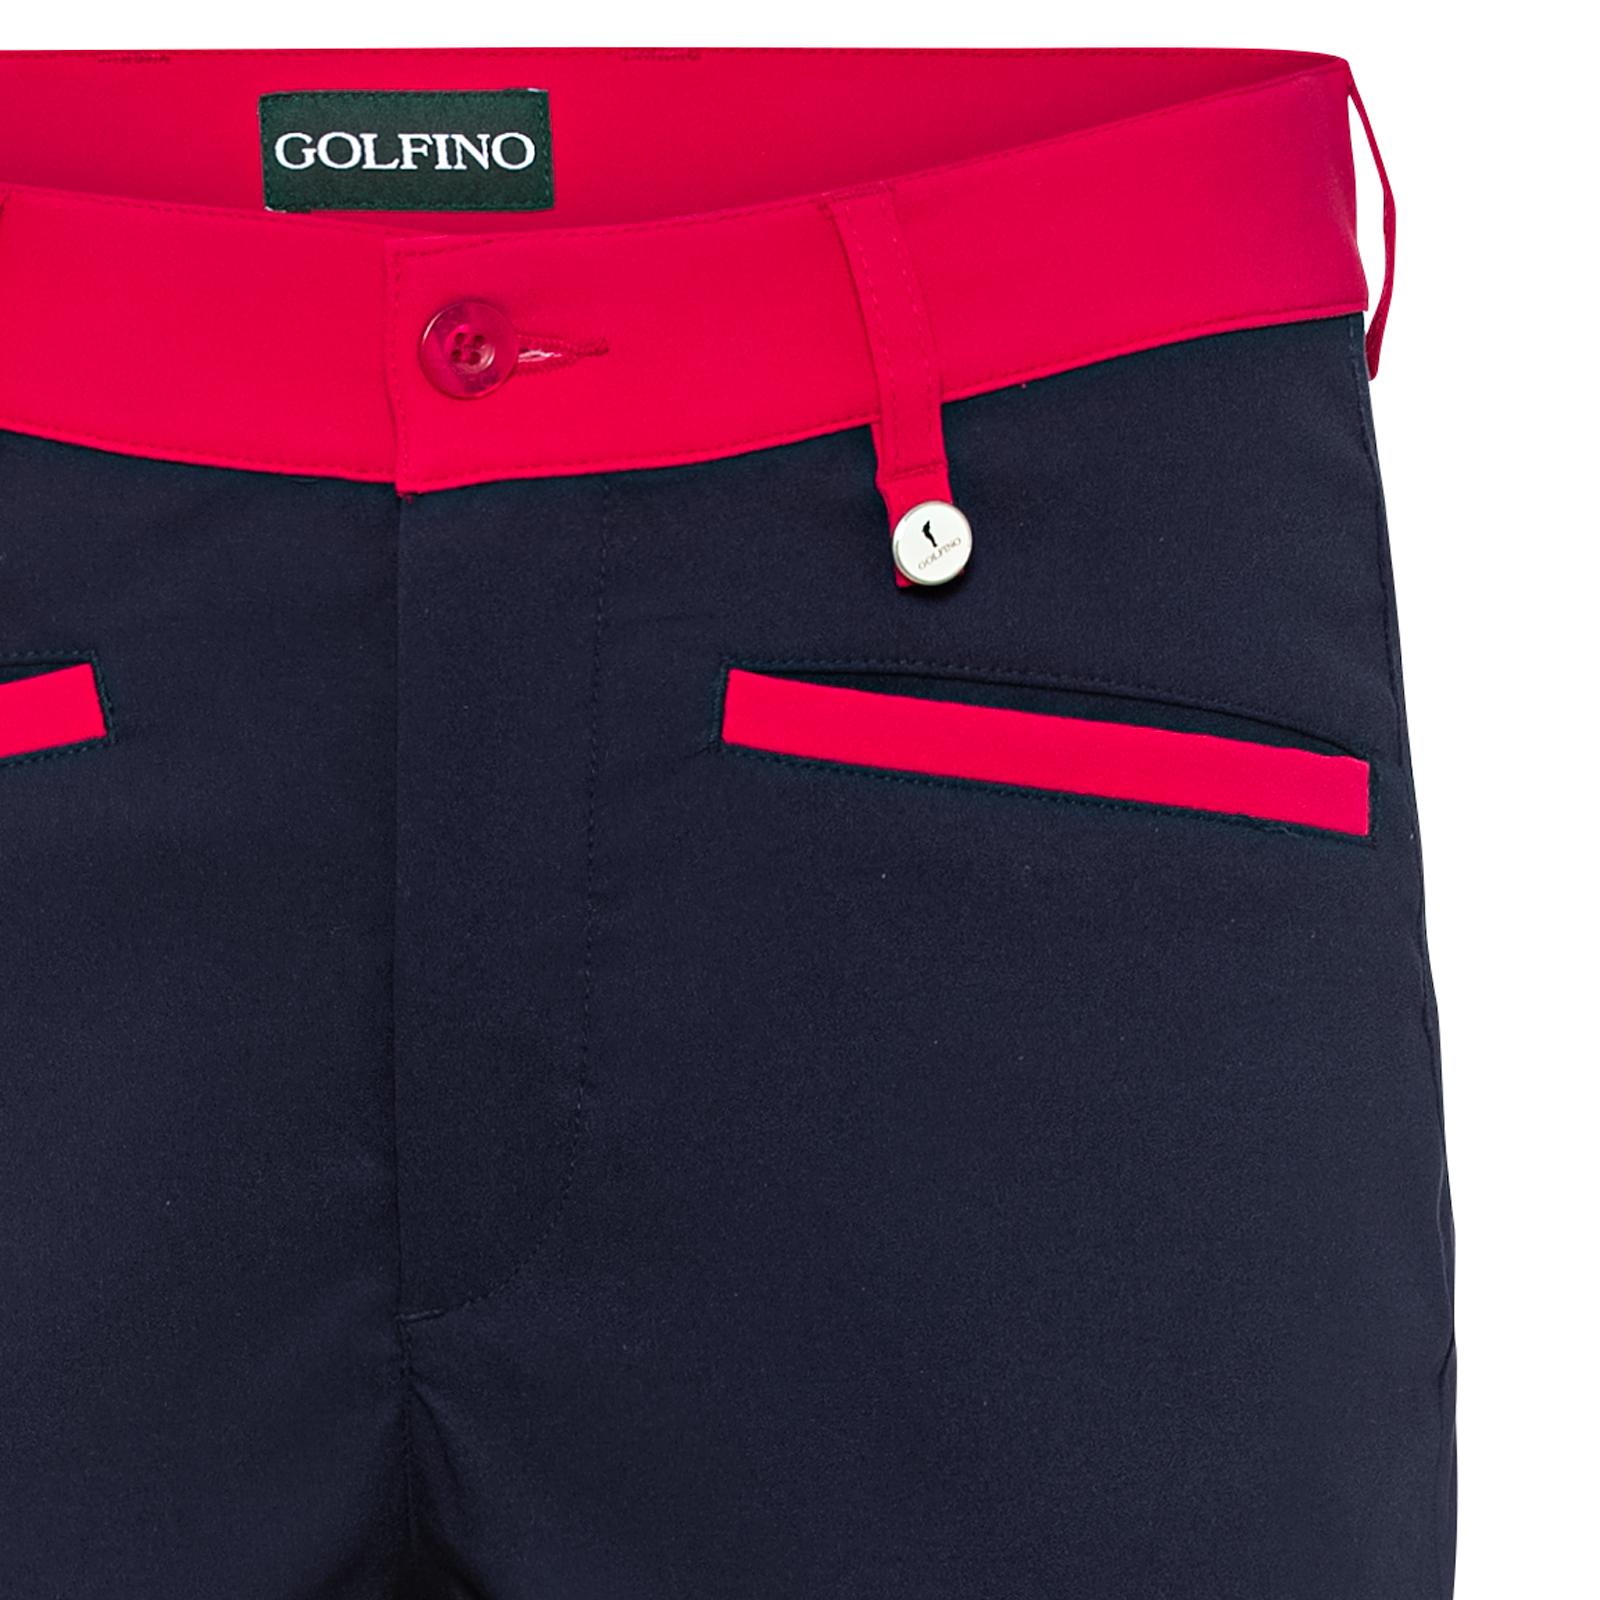 Attractive ladies' 7/8 golf trousers